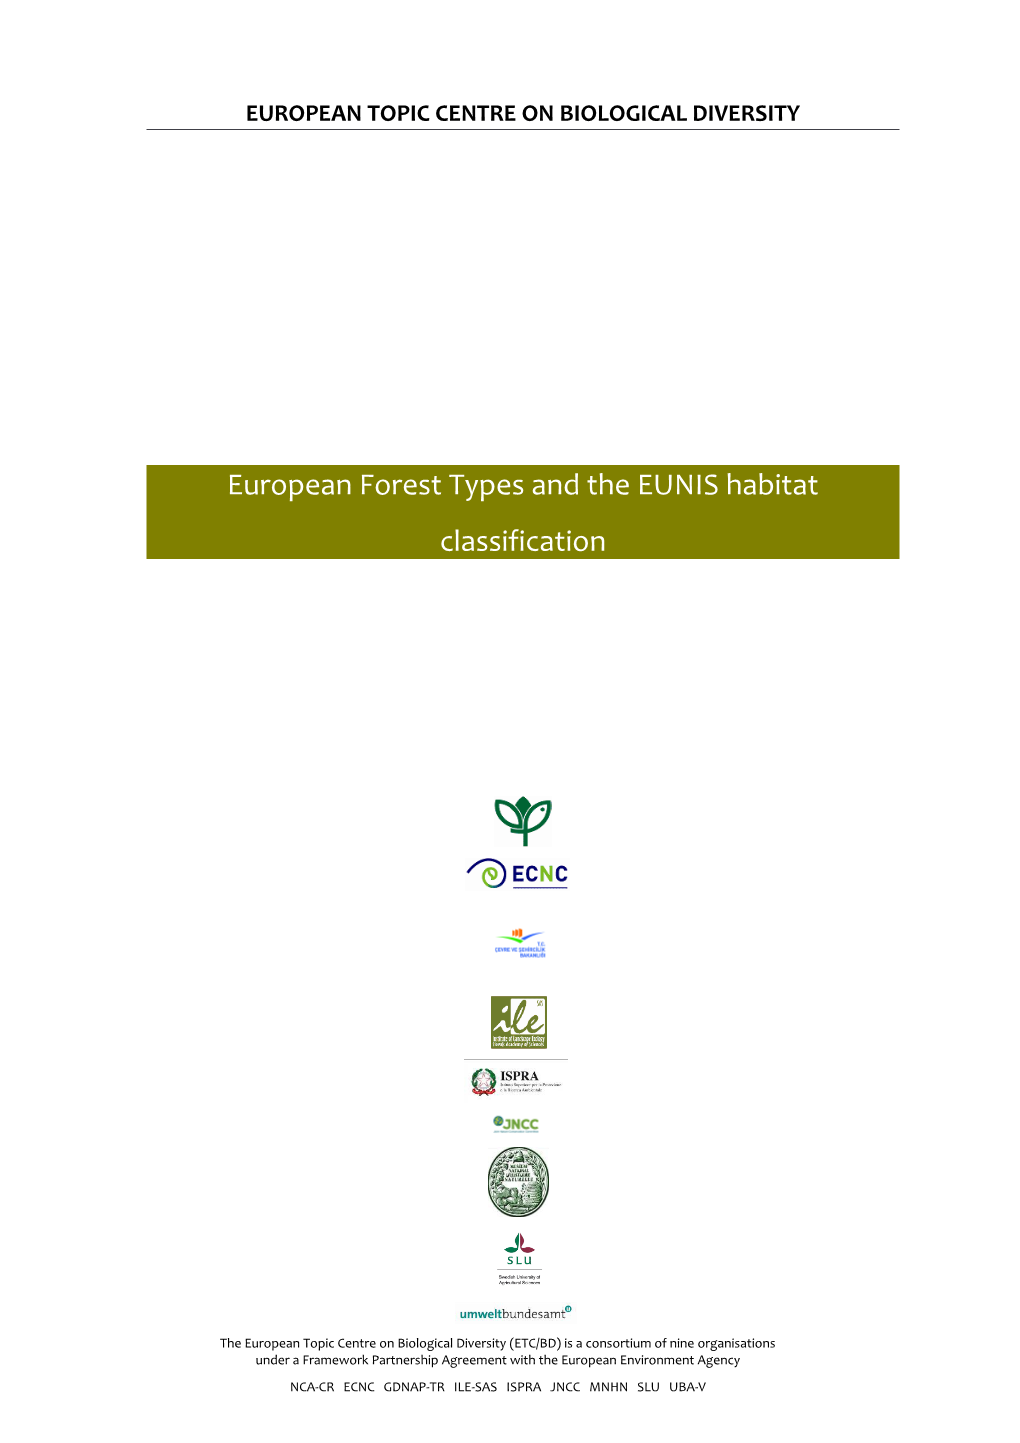 European Forest Types and the EUNIS Habitat Classification